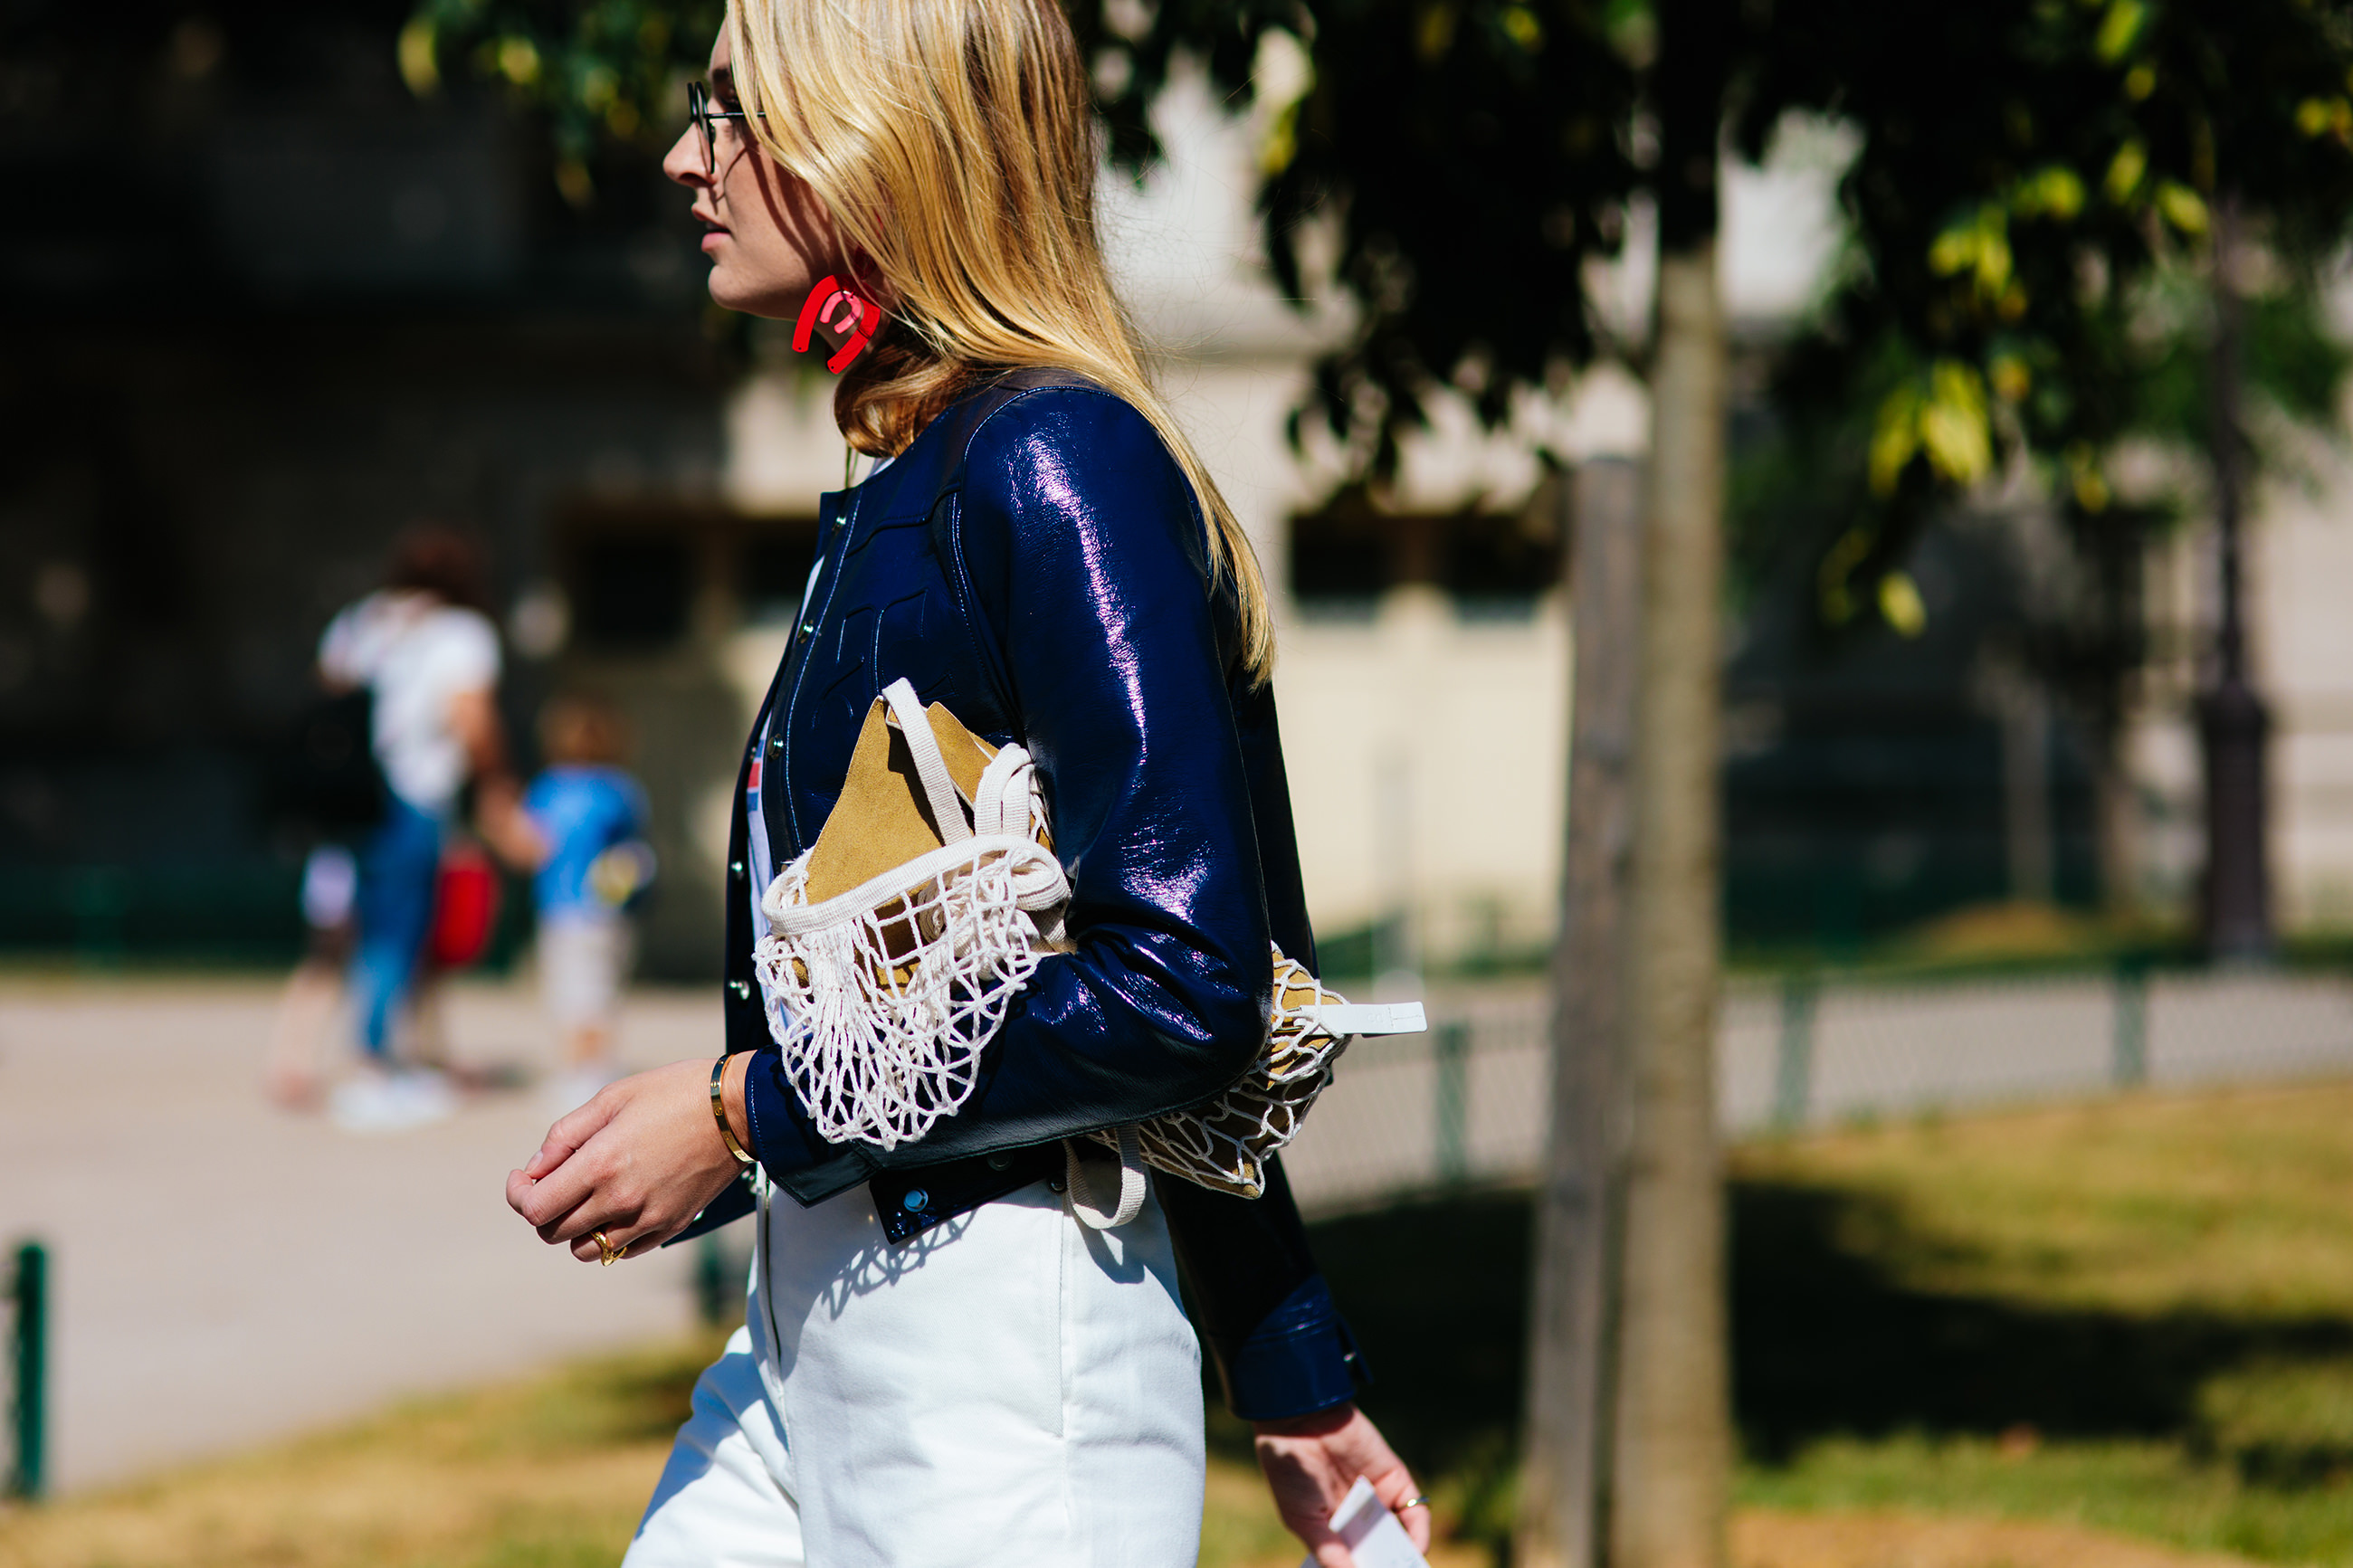 Camille Charrière wearing a blue jacket and white jeans before the Chanel Couture fashion show in Paris, France